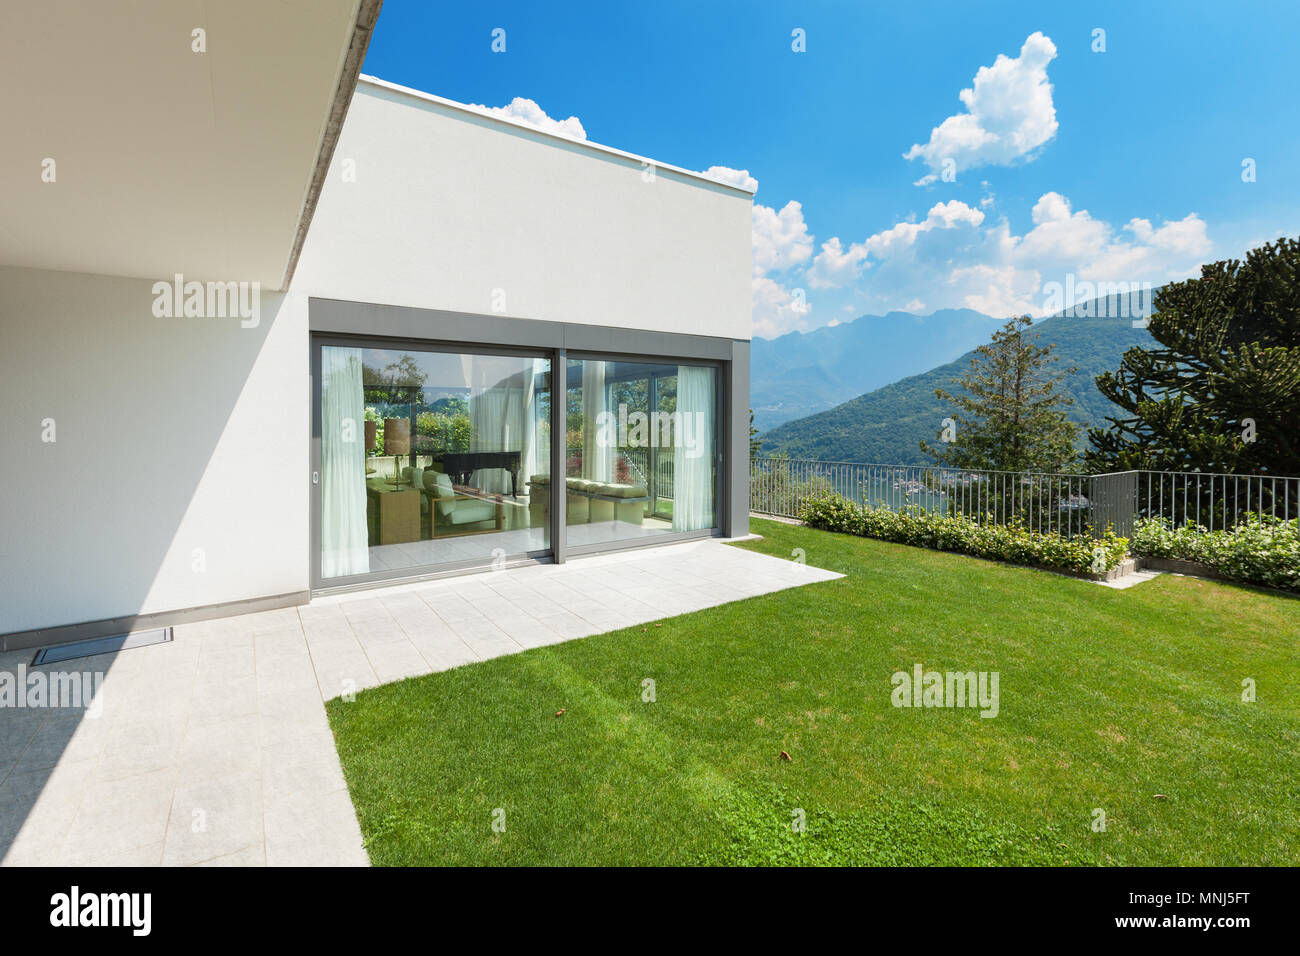 Architecture, modern white house with garden, outdoors Stock Photo